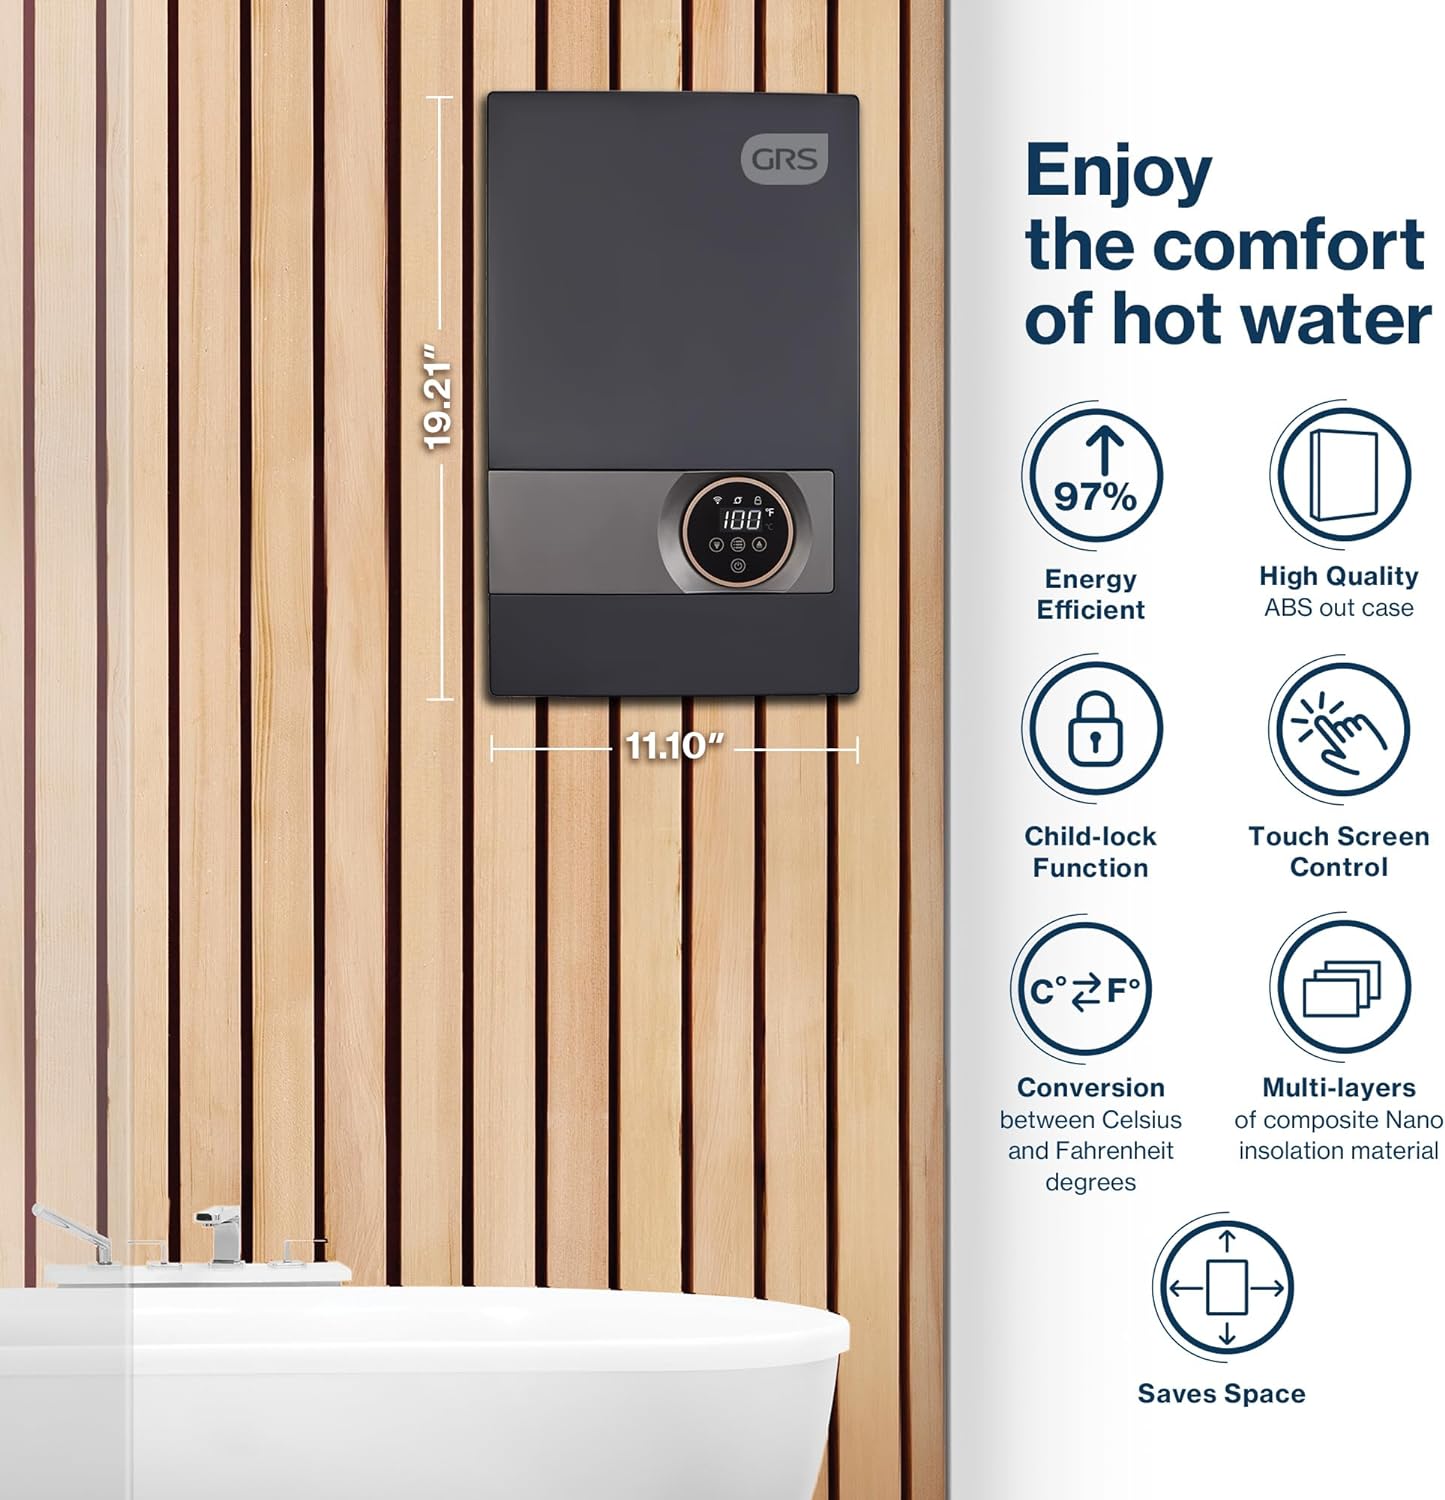 GRS Tankless Water Heater Electric, 27KW Instant Hot Water Heater, 24-Hour Hot Water Supply for Shower, Kitchen, Whole H